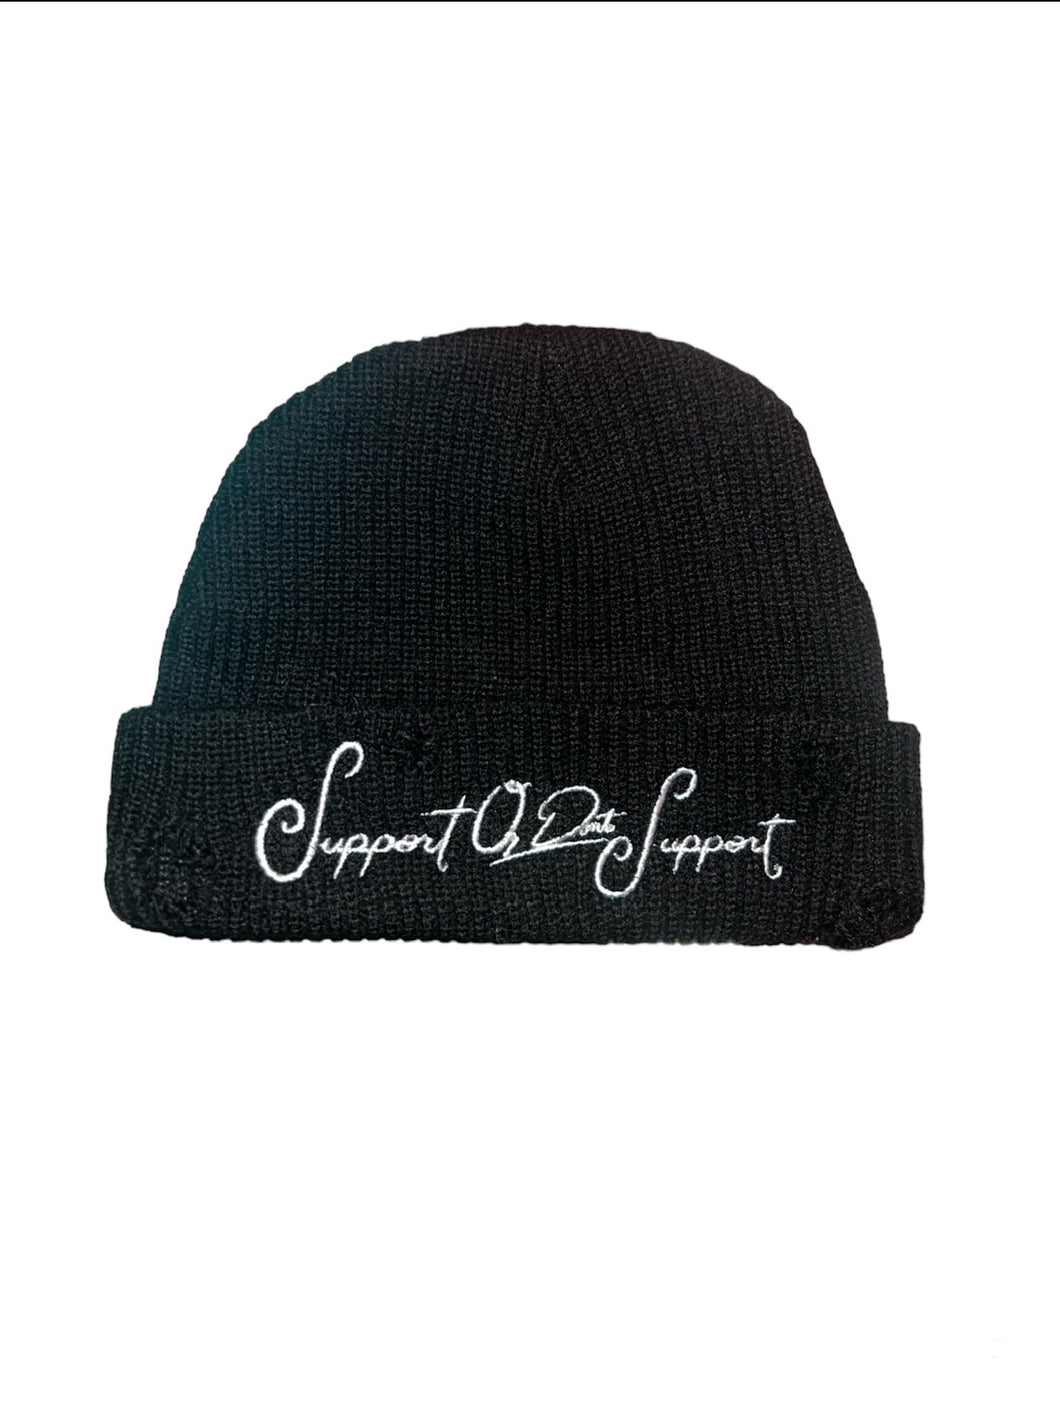 Support or Don’t Support Beanie